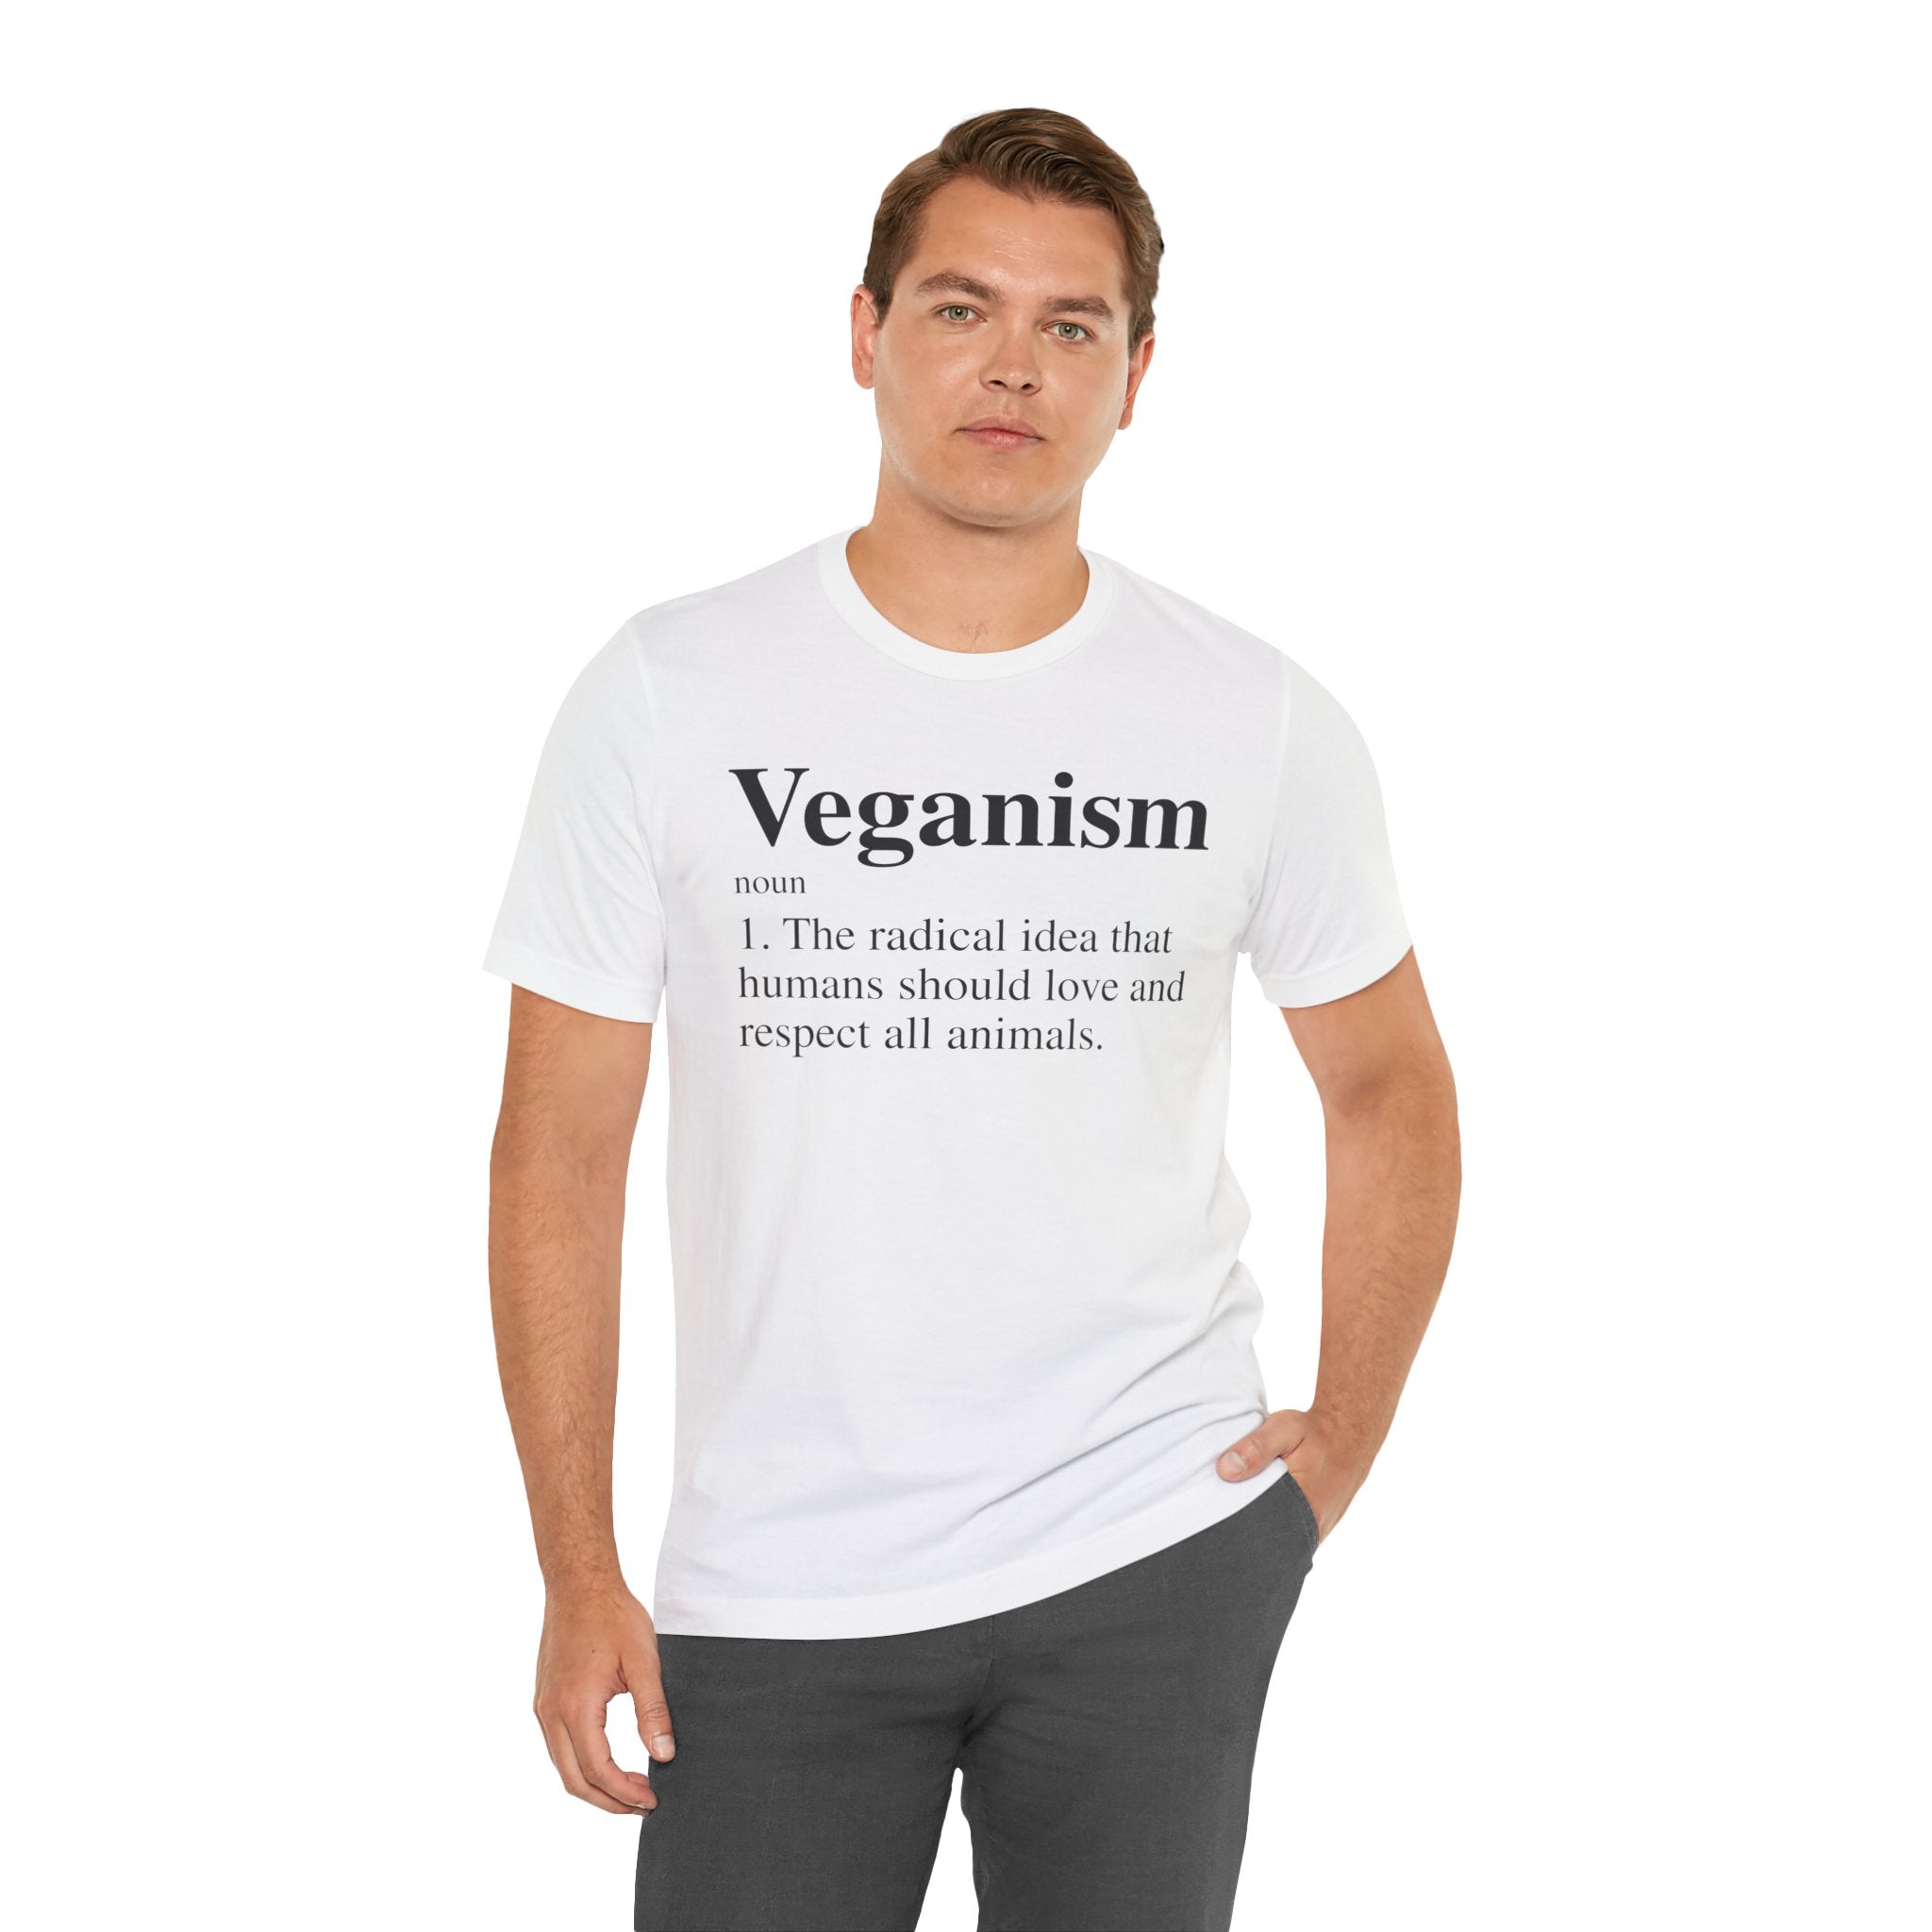 A man in a Veganism T-Shirt, with the word "veganism" and its definition printed on it, standing against a neutral background.